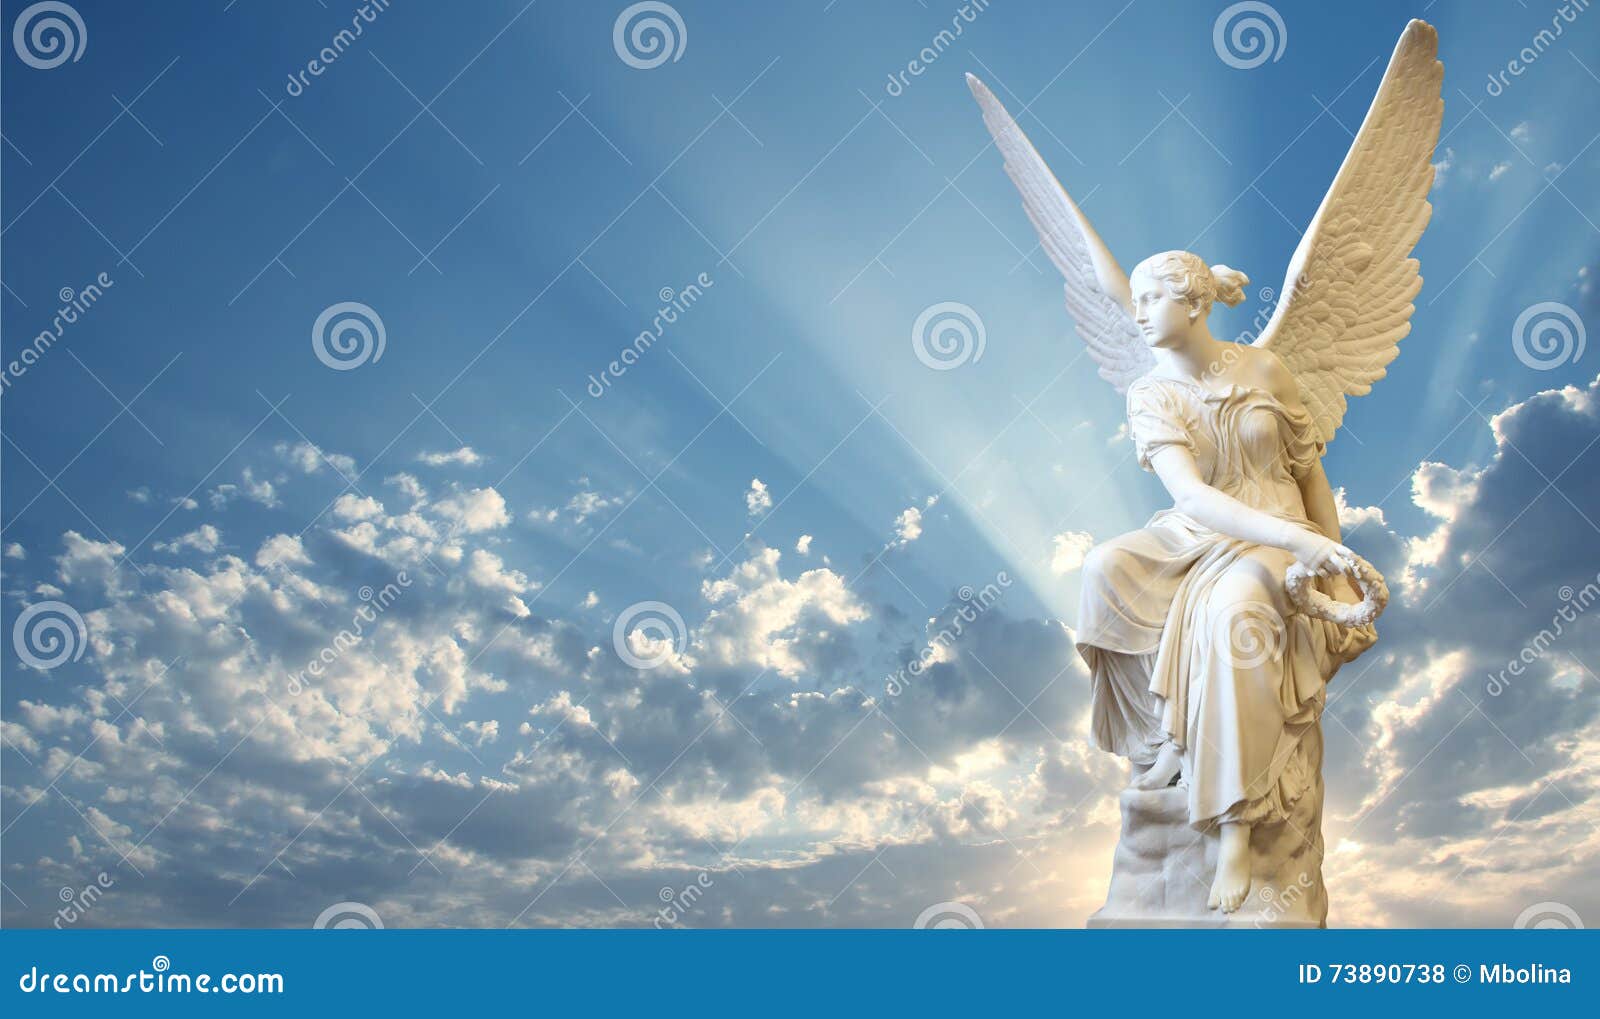 Beautiful angel in heaven stock photo. Image of pure - 73890738